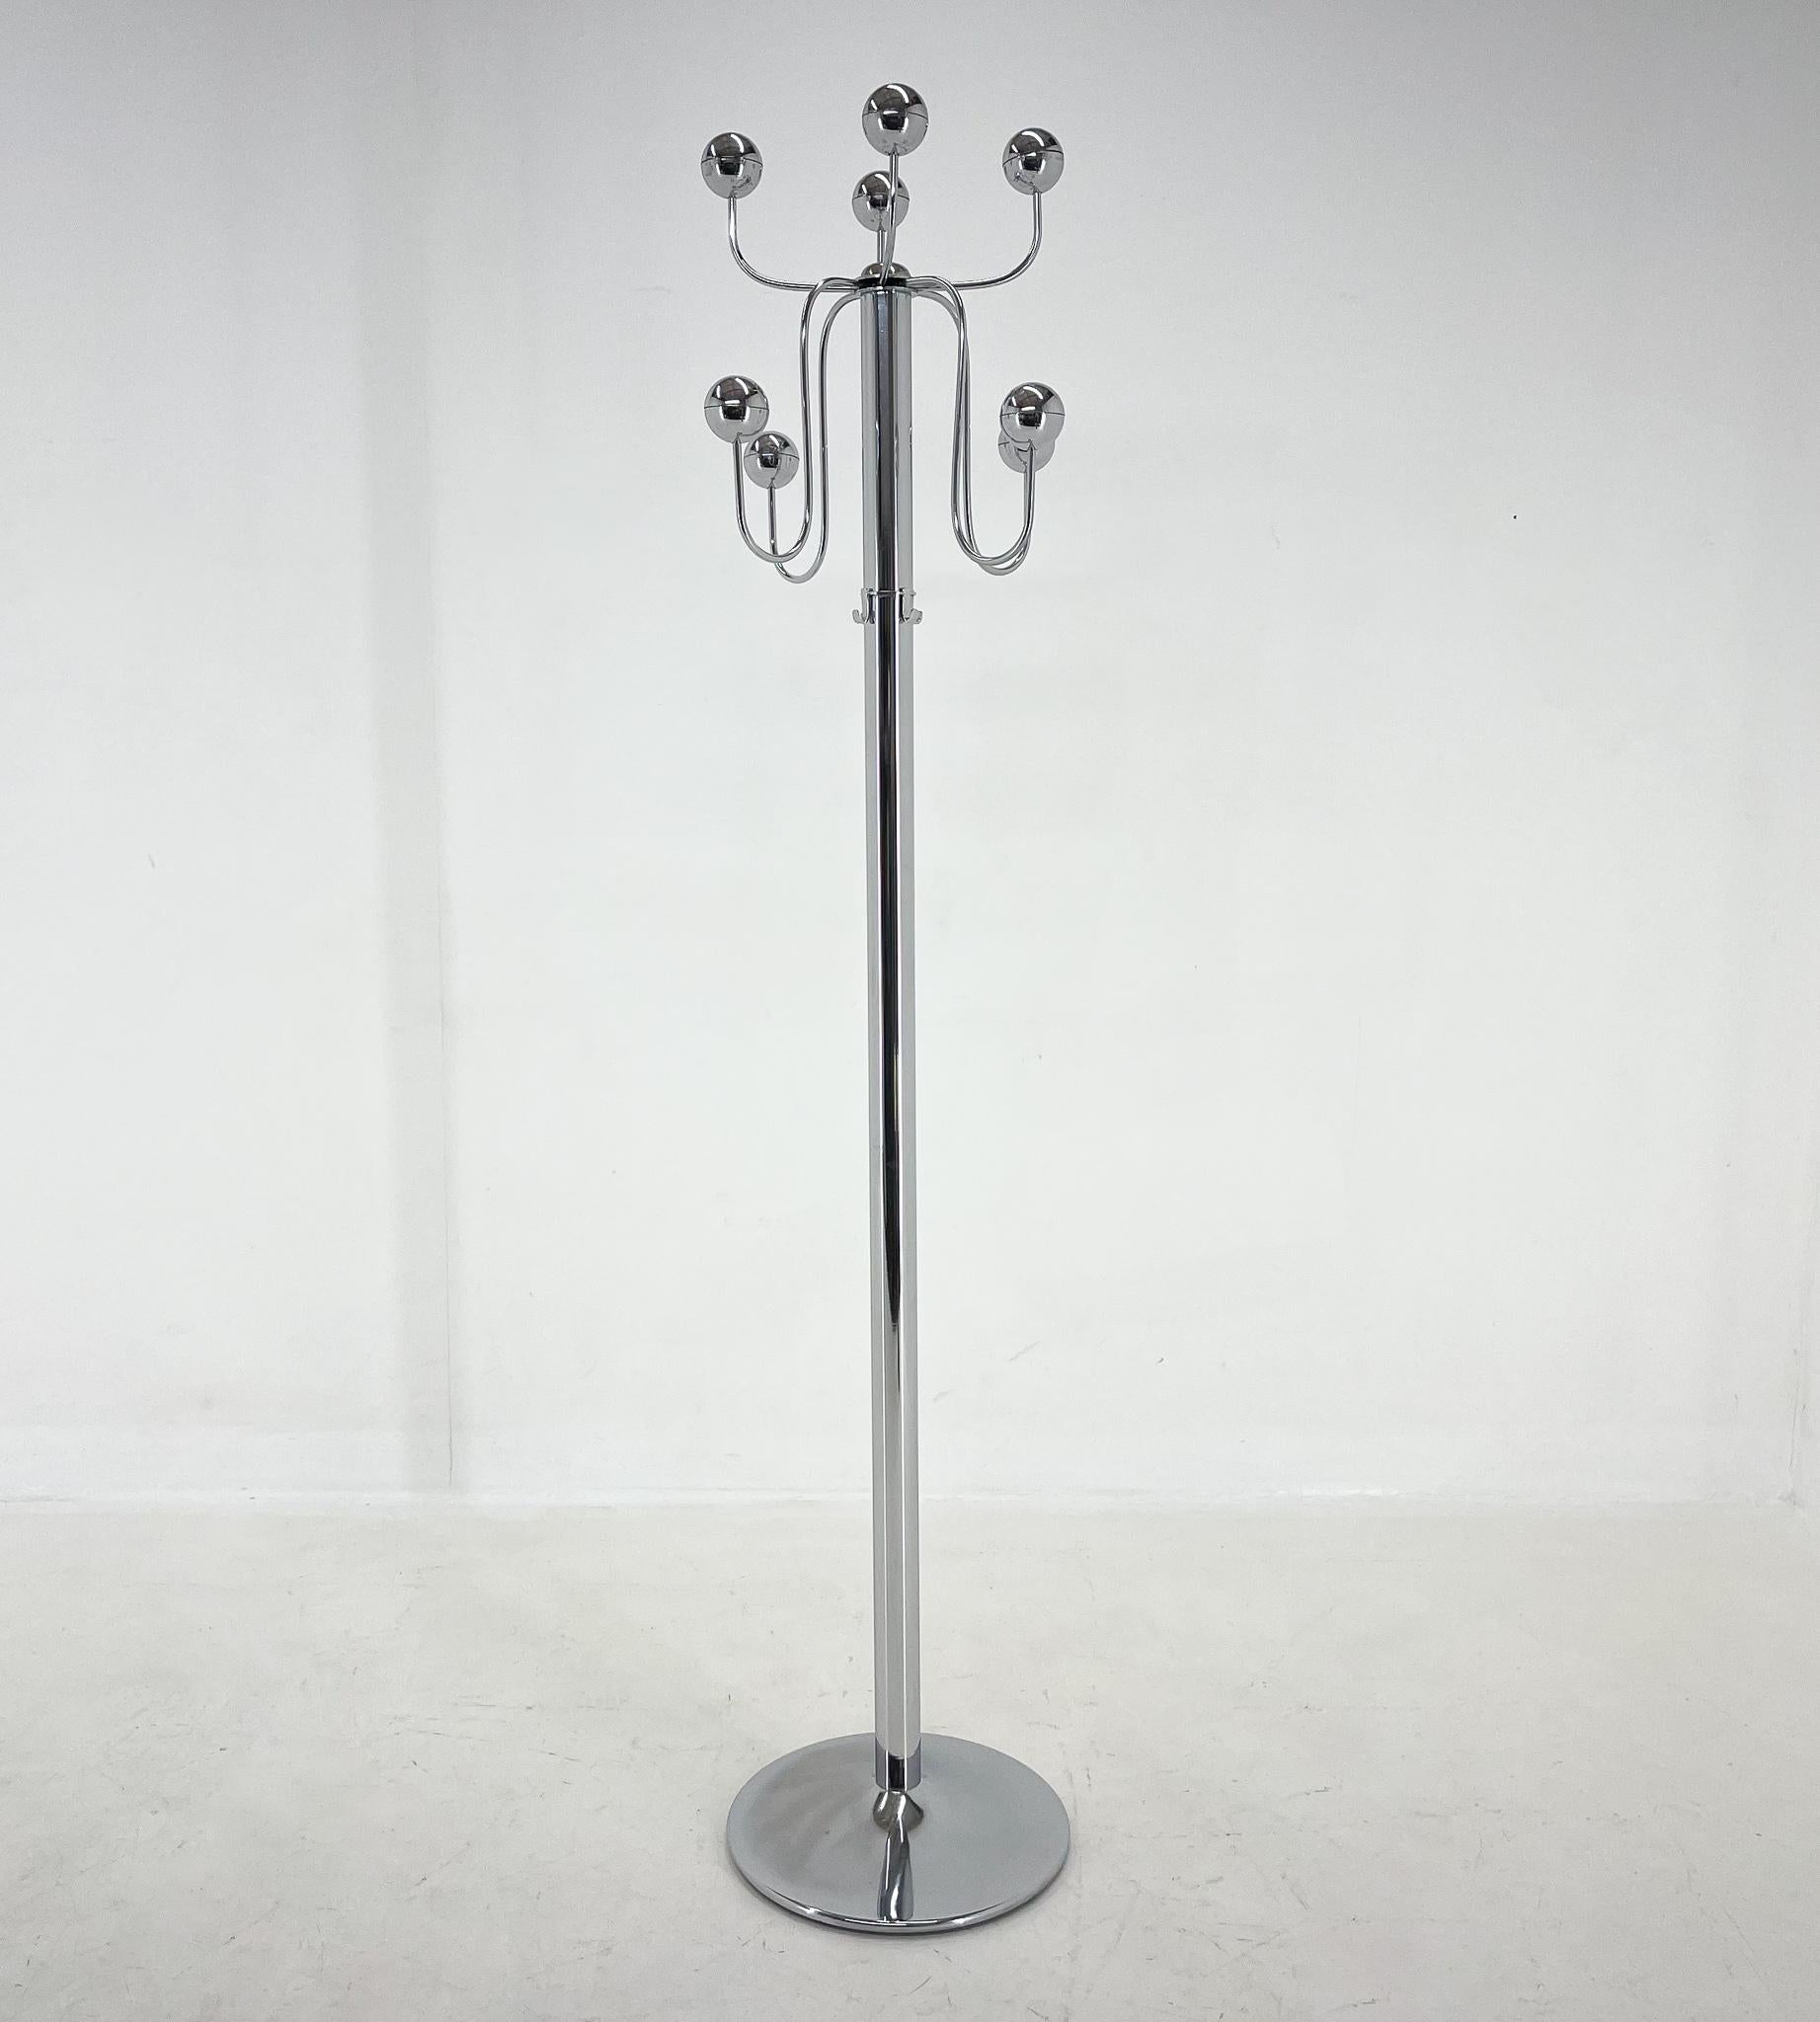 Multi-armed vintage Italian chrome coat hanger from the 1960's. Very good vintage condition.